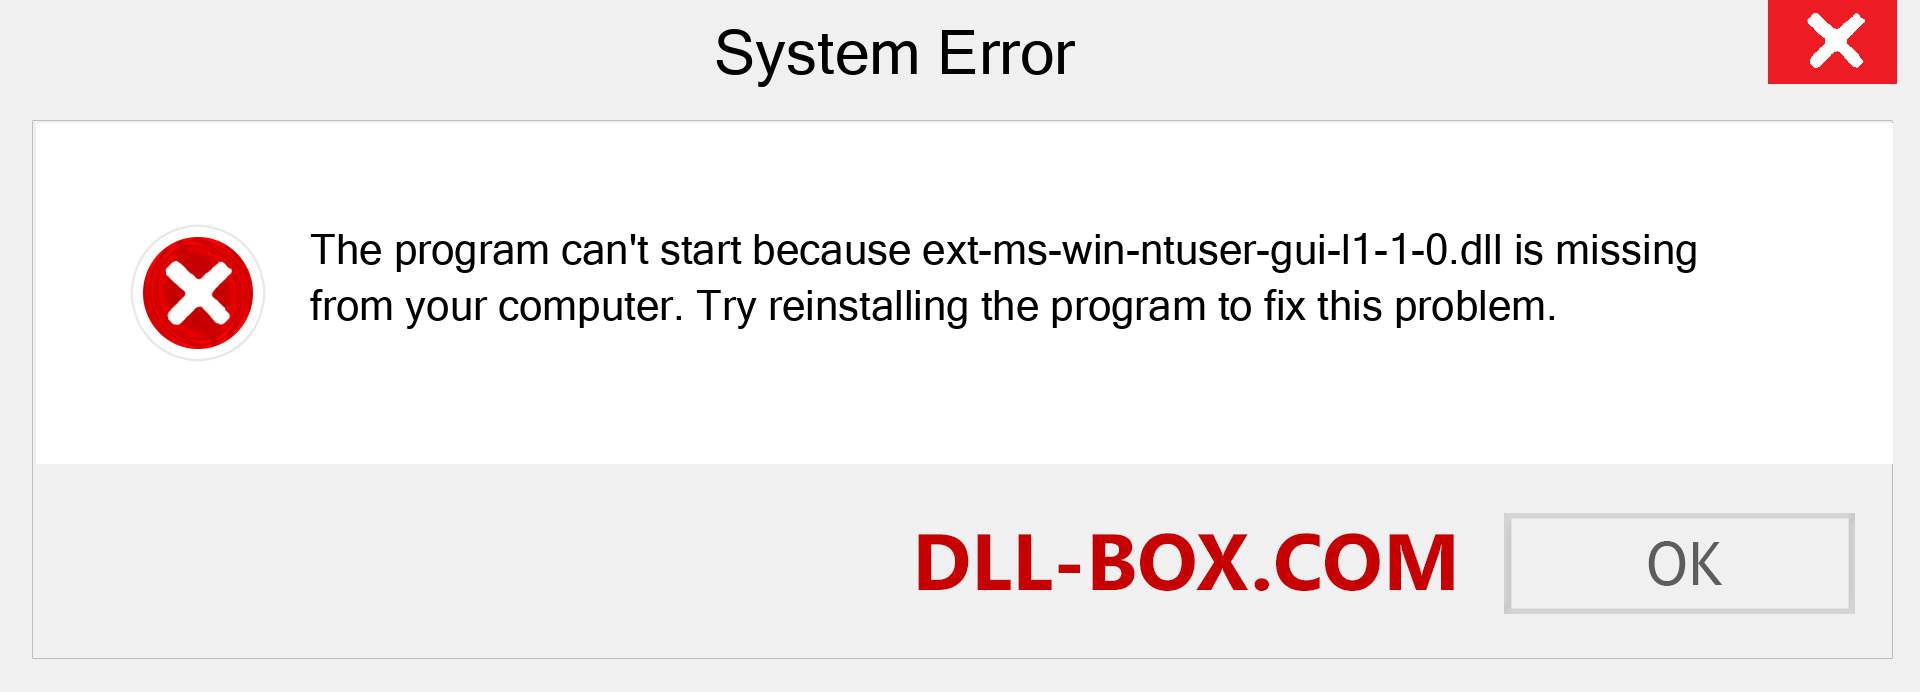  ext-ms-win-ntuser-gui-l1-1-0.dll file is missing?. Download for Windows 7, 8, 10 - Fix  ext-ms-win-ntuser-gui-l1-1-0 dll Missing Error on Windows, photos, images